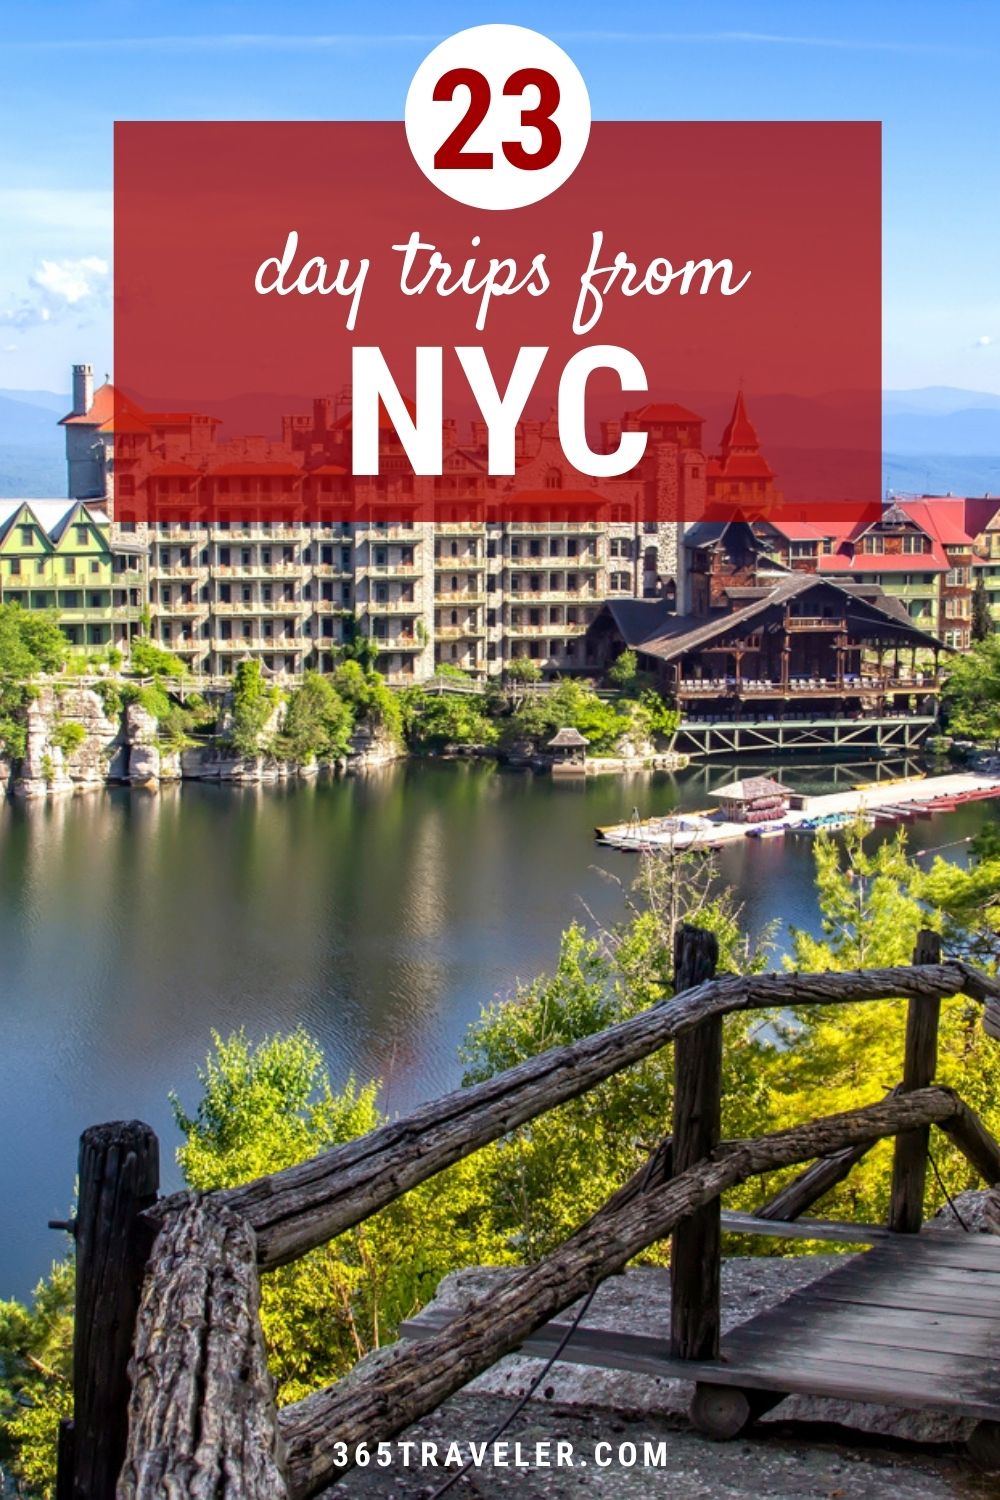 23 Day Trips From NYC You’ve Got To Experience